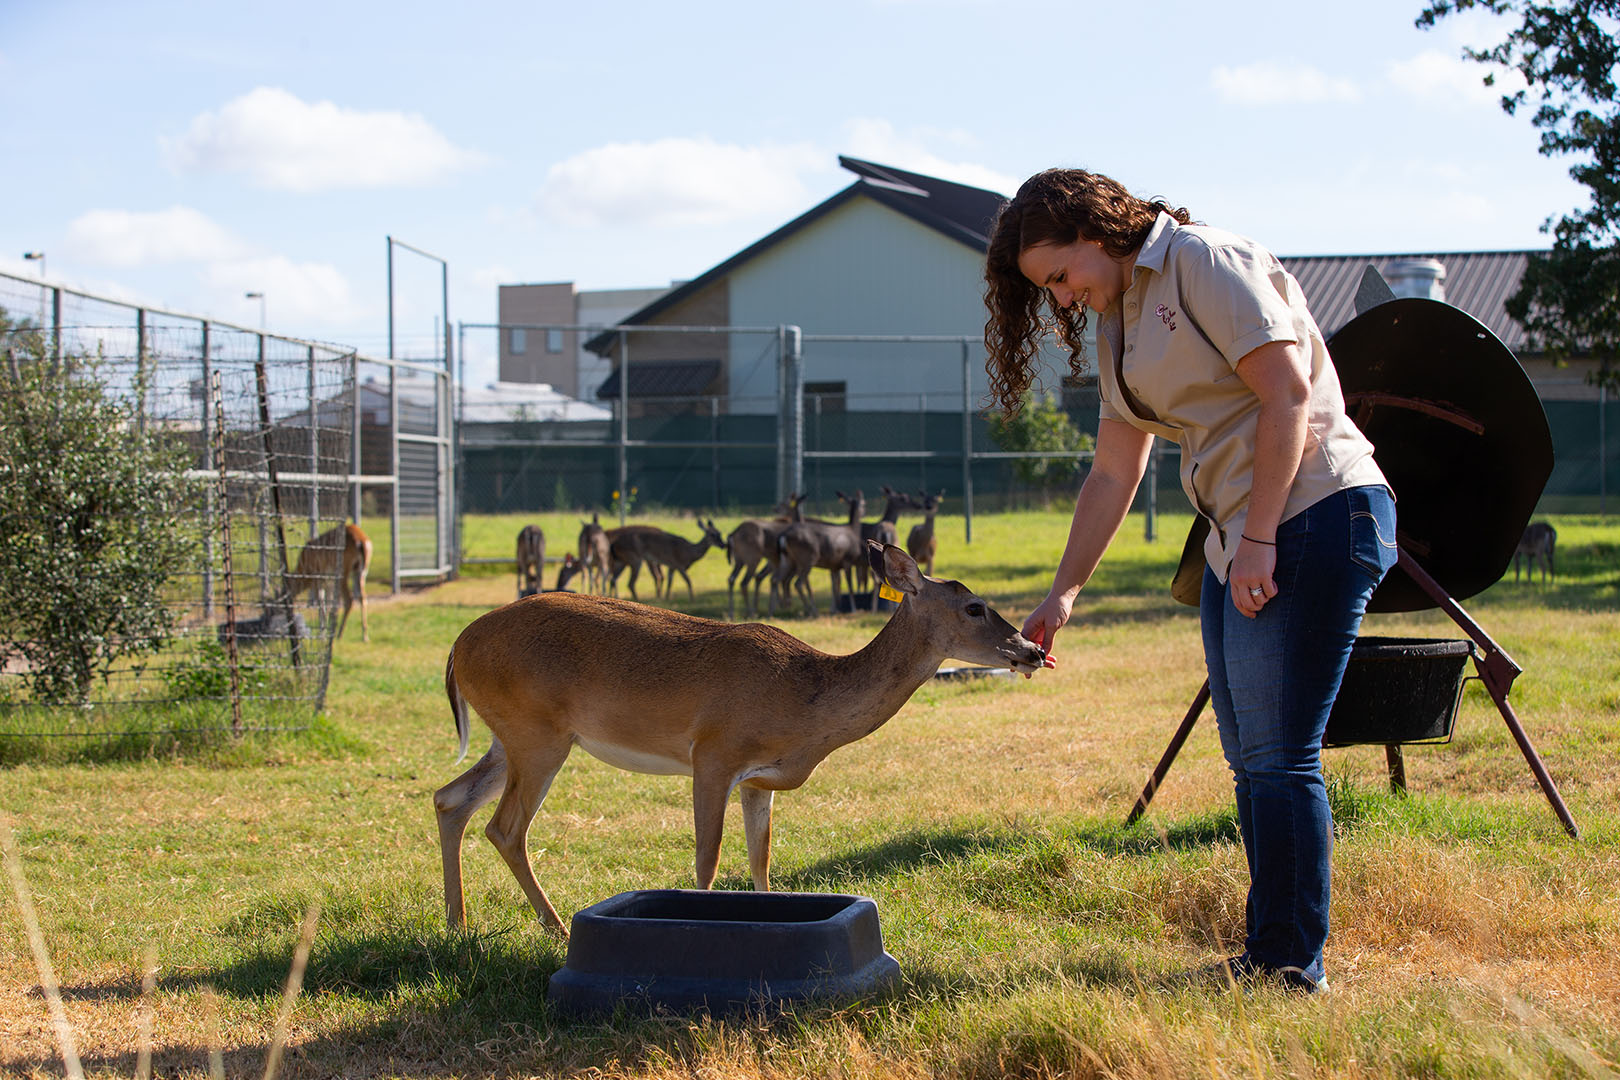 A woman pets a deer with a herd in the background